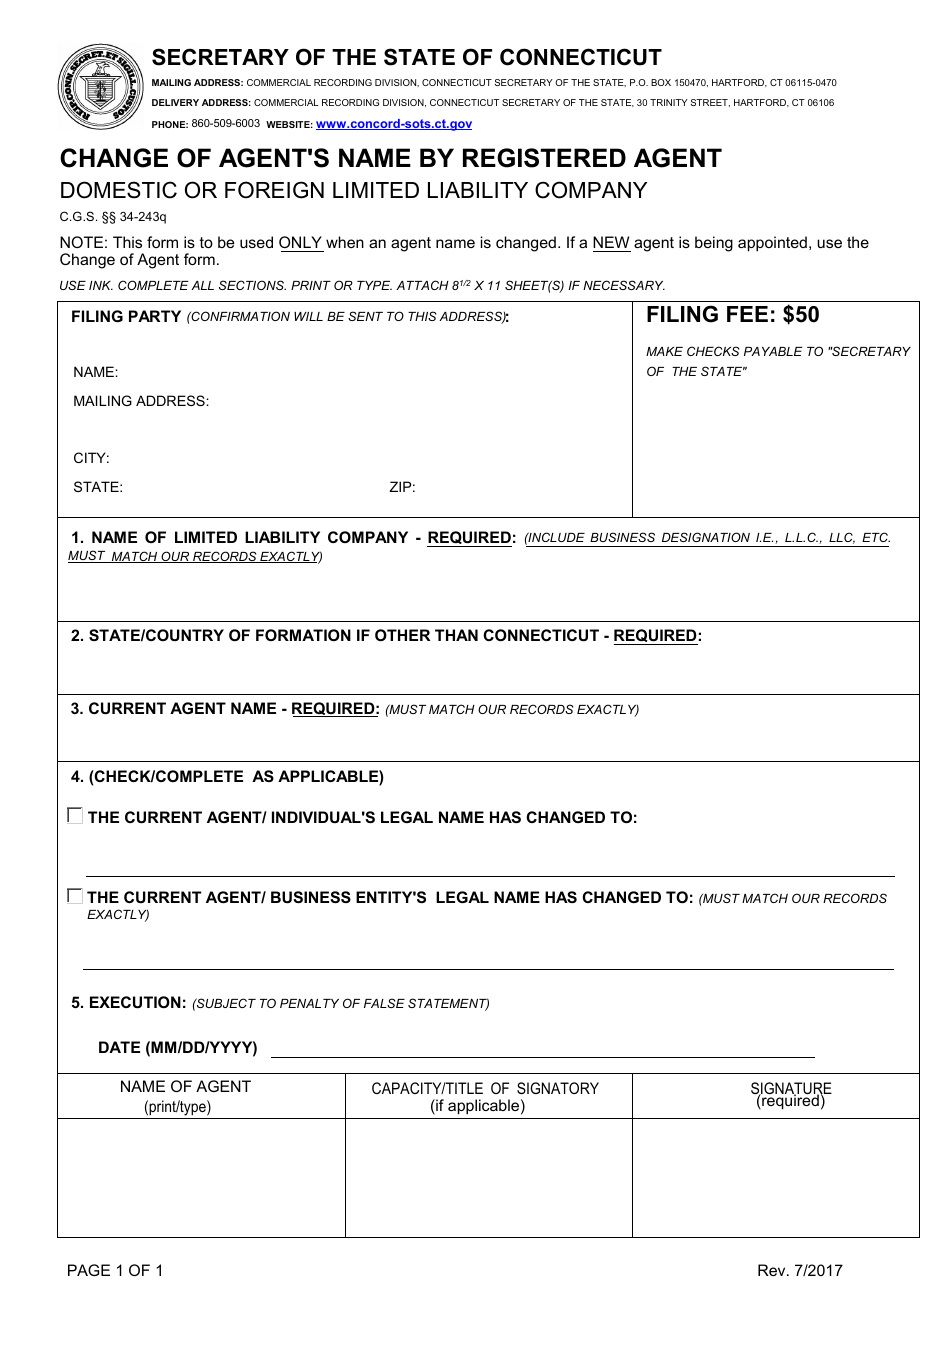 Change of Agents Name by Registered Agent - Domestic or Foreign Limited Liability Company - Connecticut, Page 1